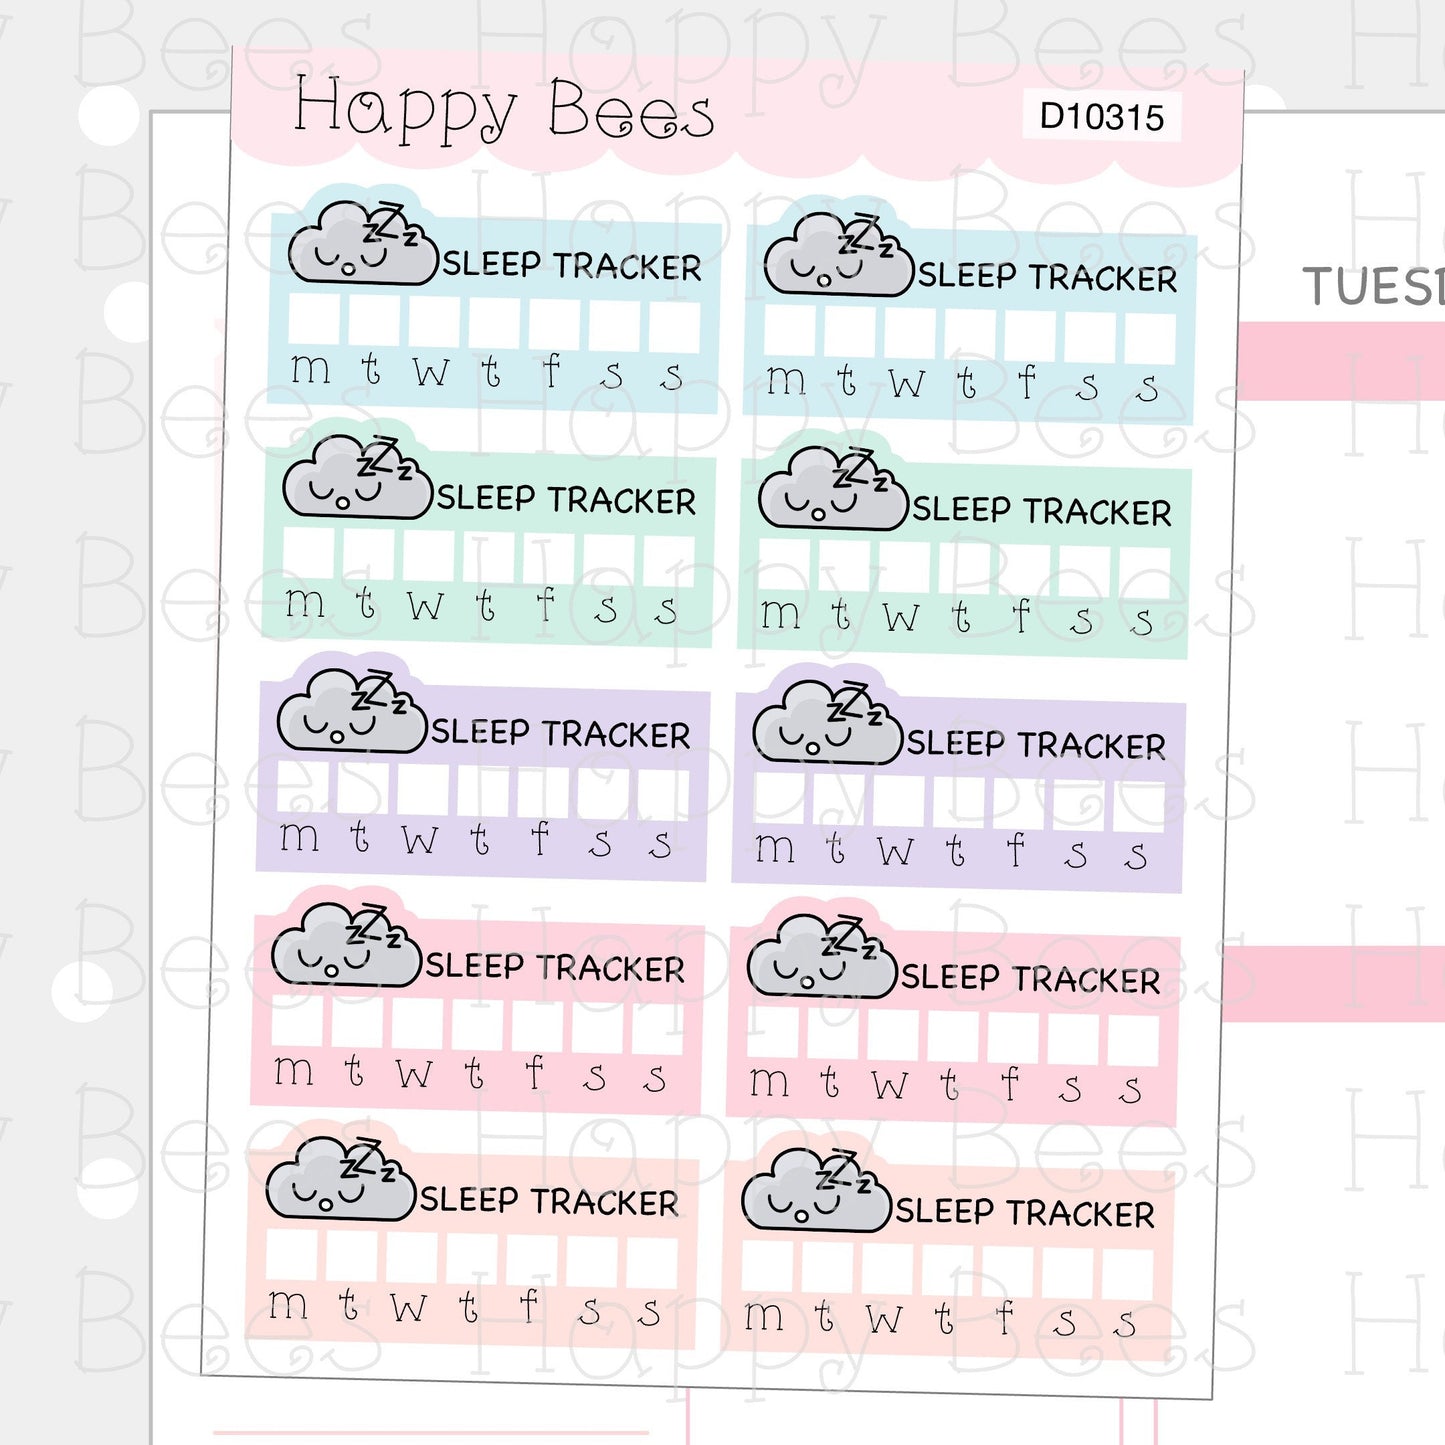 Weekly Sleep Tracker Boxes - Cute Doodles Health Planner Stickers D10315